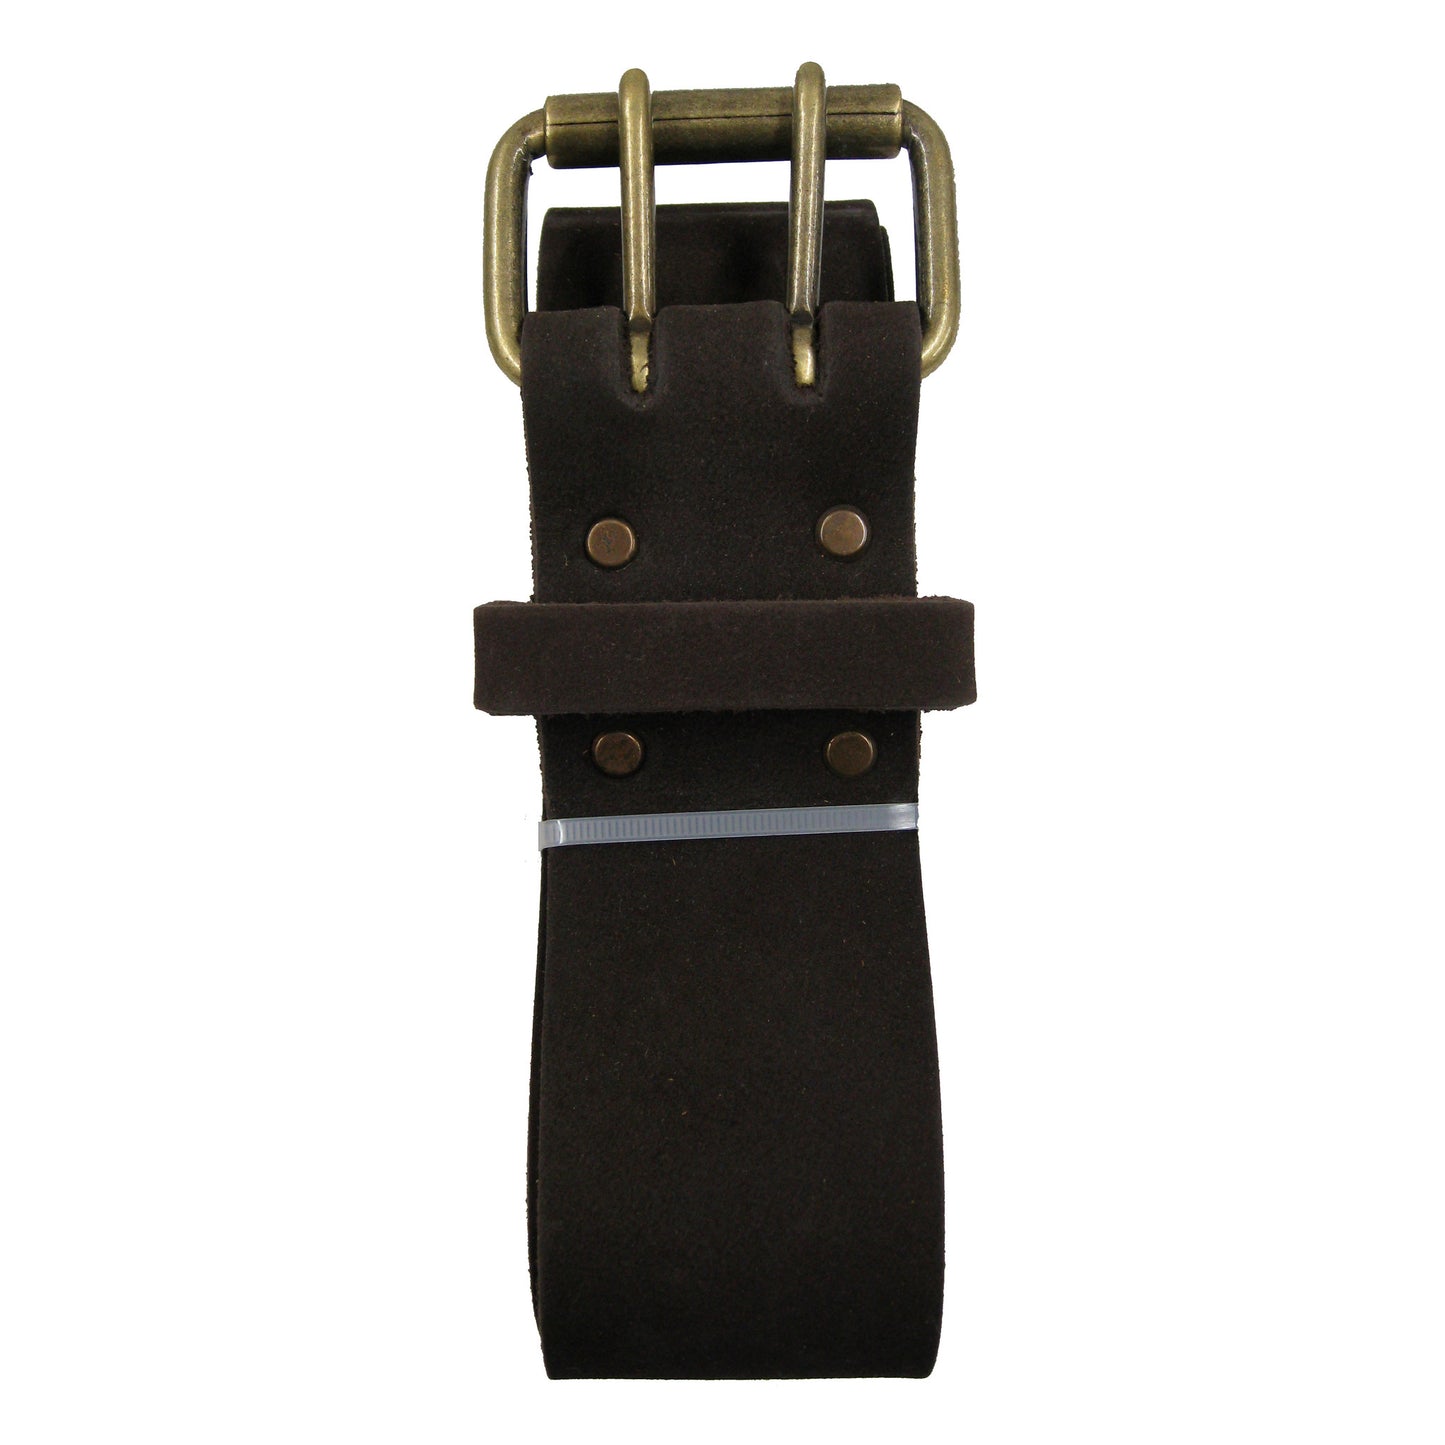 Style n Craft 74053 - 2 Inch Wide Work Belt - Extra Long - in Heavy Top Grain Oiled Leather with Double Prong Metal Roller Buckle - Foldedd View